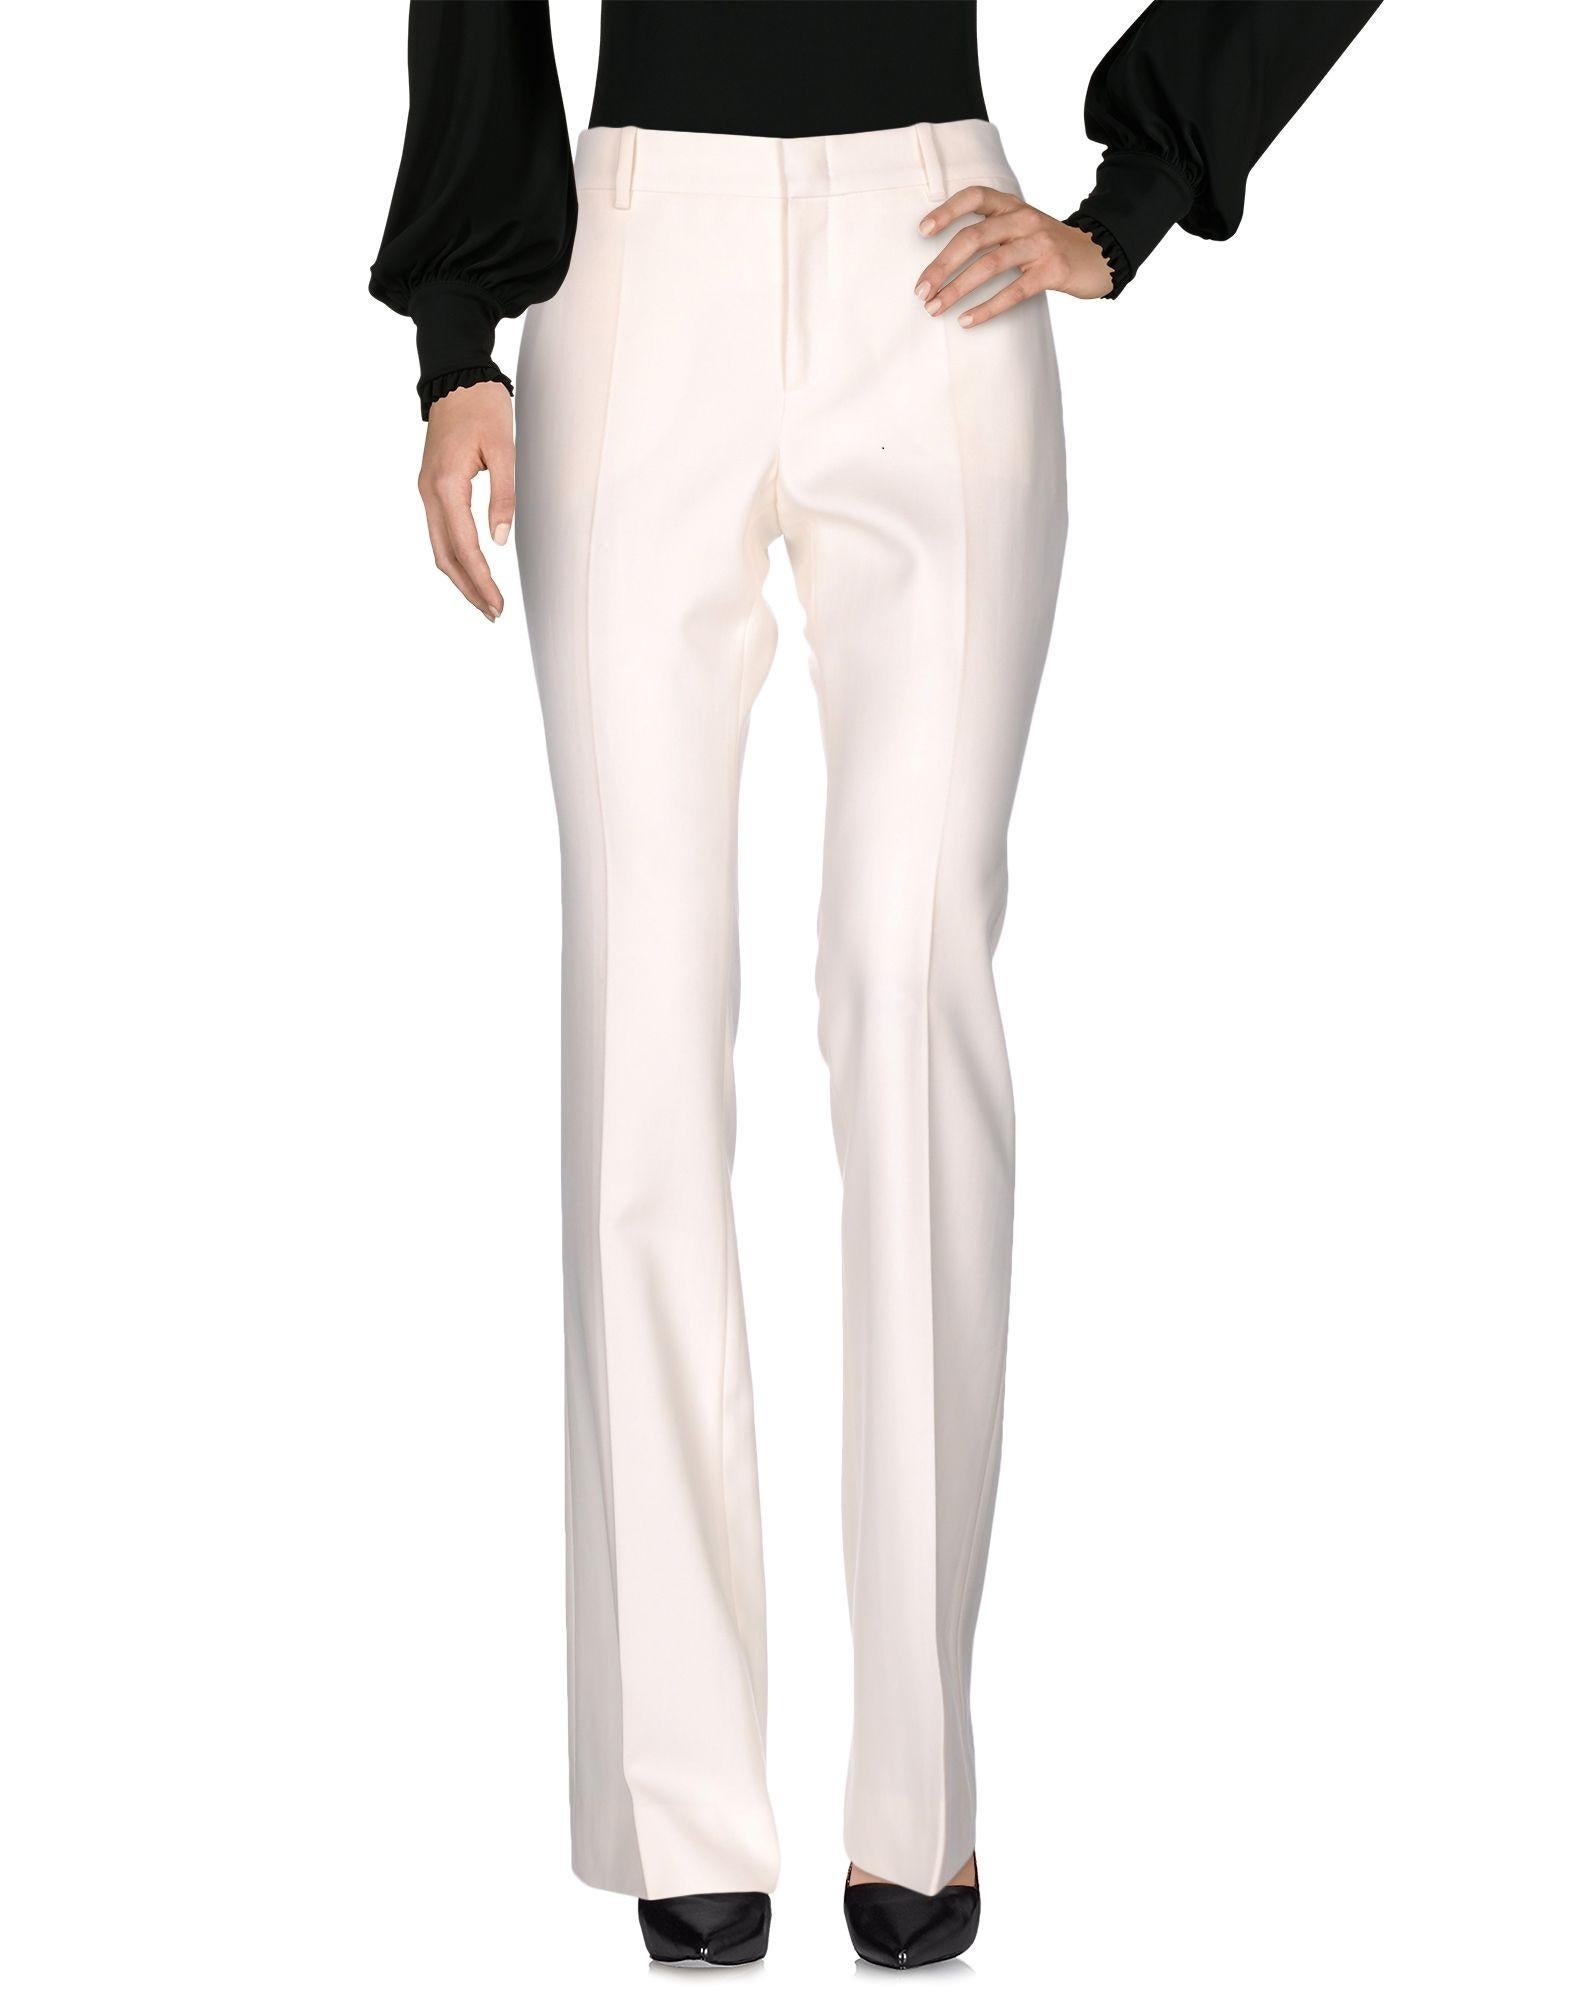 New Gucci Wool Dress Pants
Italian size - 46
Designer Color - Bone ( off white)
100% Wool, Boot-cut Style, Two Side Pockets, Two Back Pockets, Zip Closure.
Measurements: Total Length - 46 inches, Waist - up to 37.5